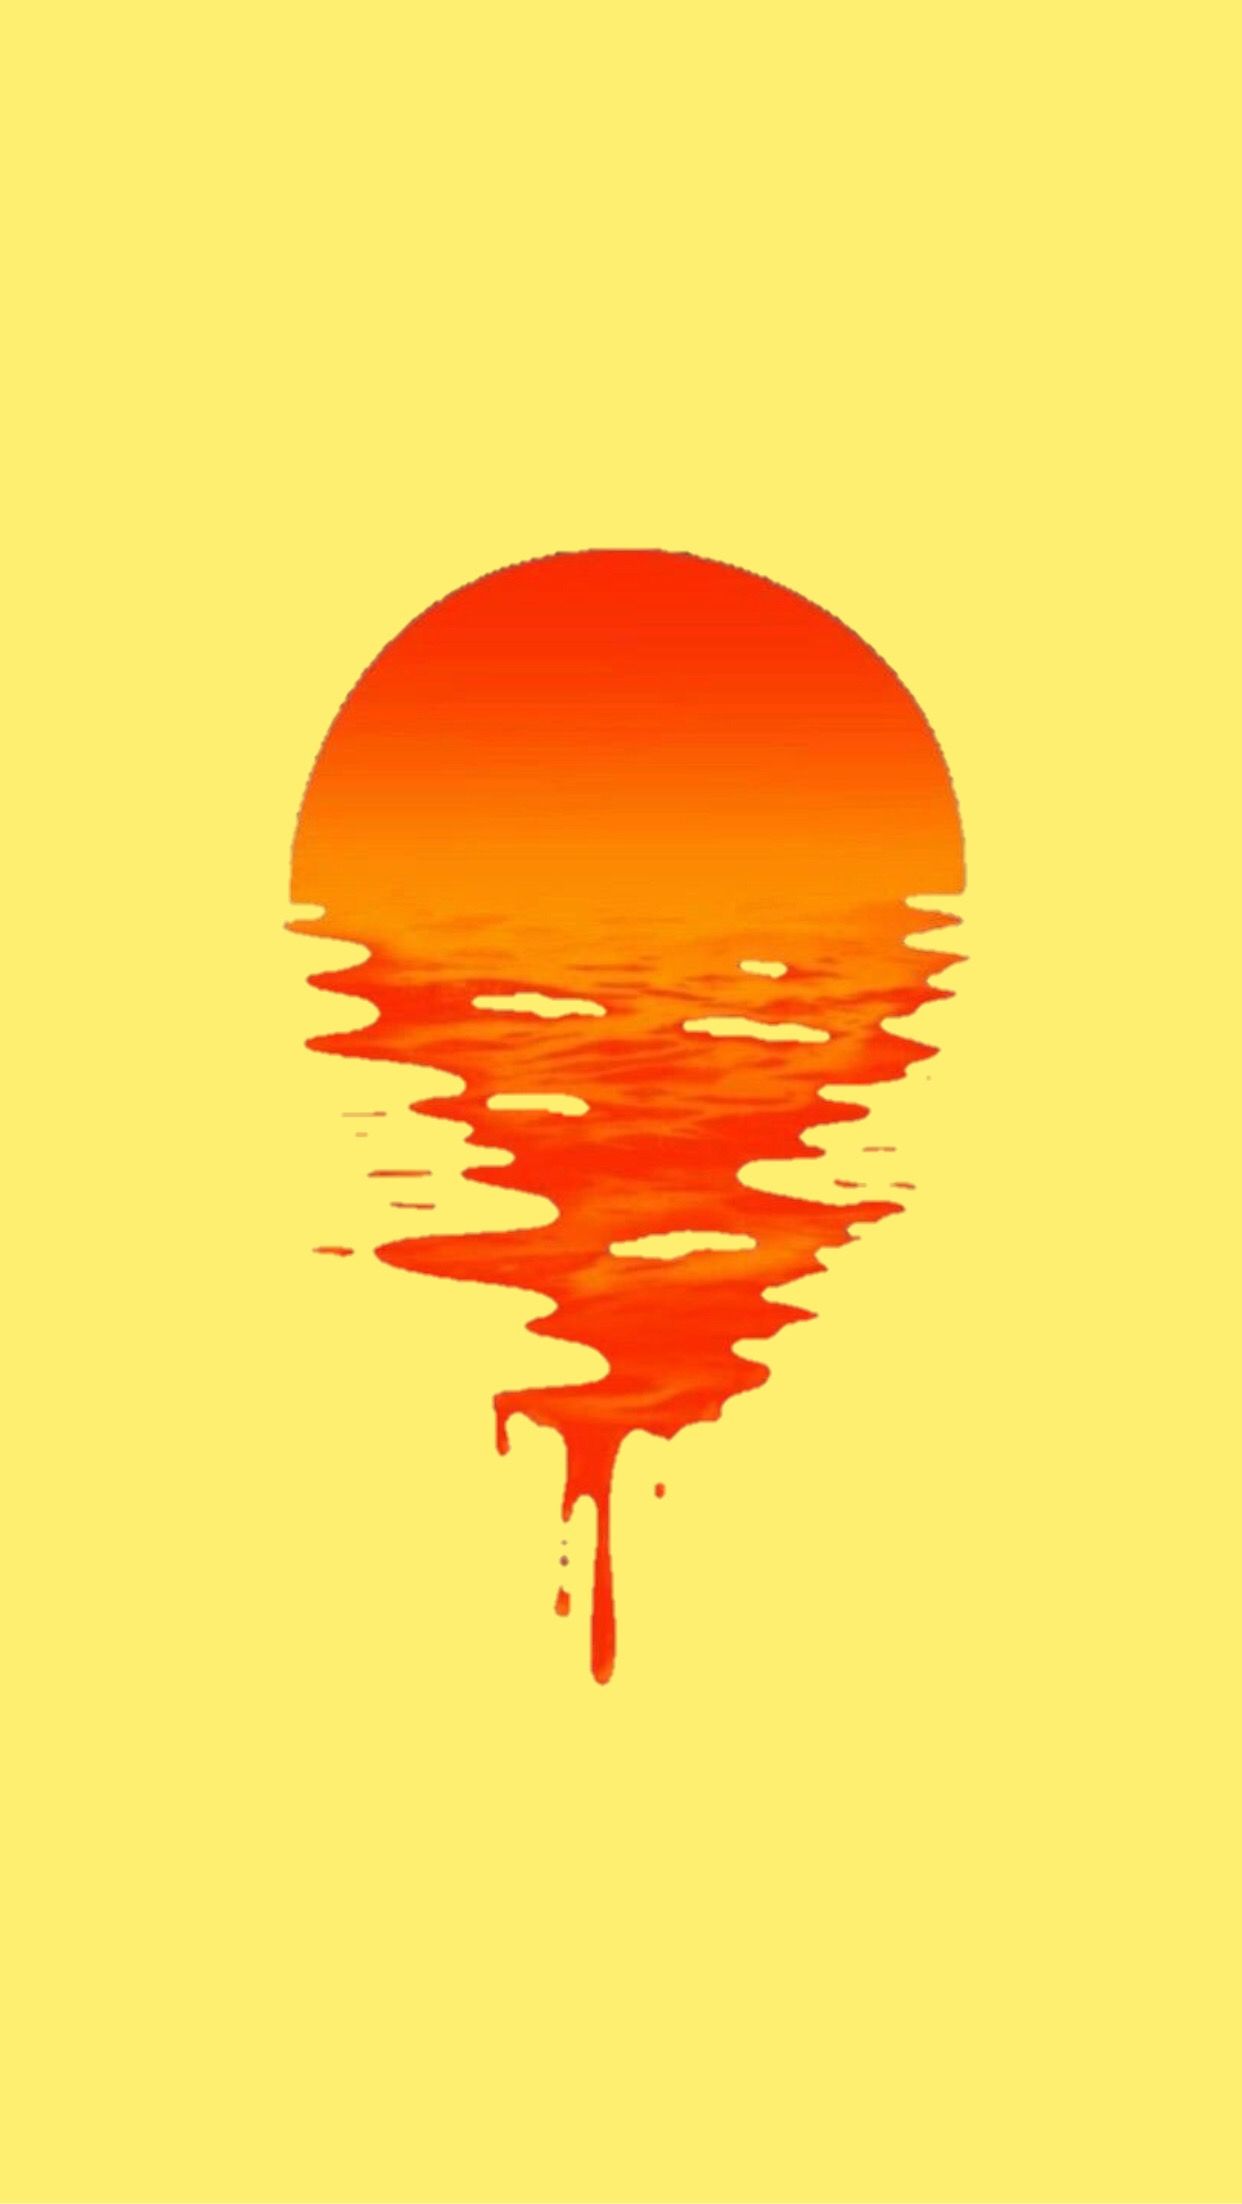 A painting of a dripping red sun on a yellow background - Orange, sun, sunshine, sunlight